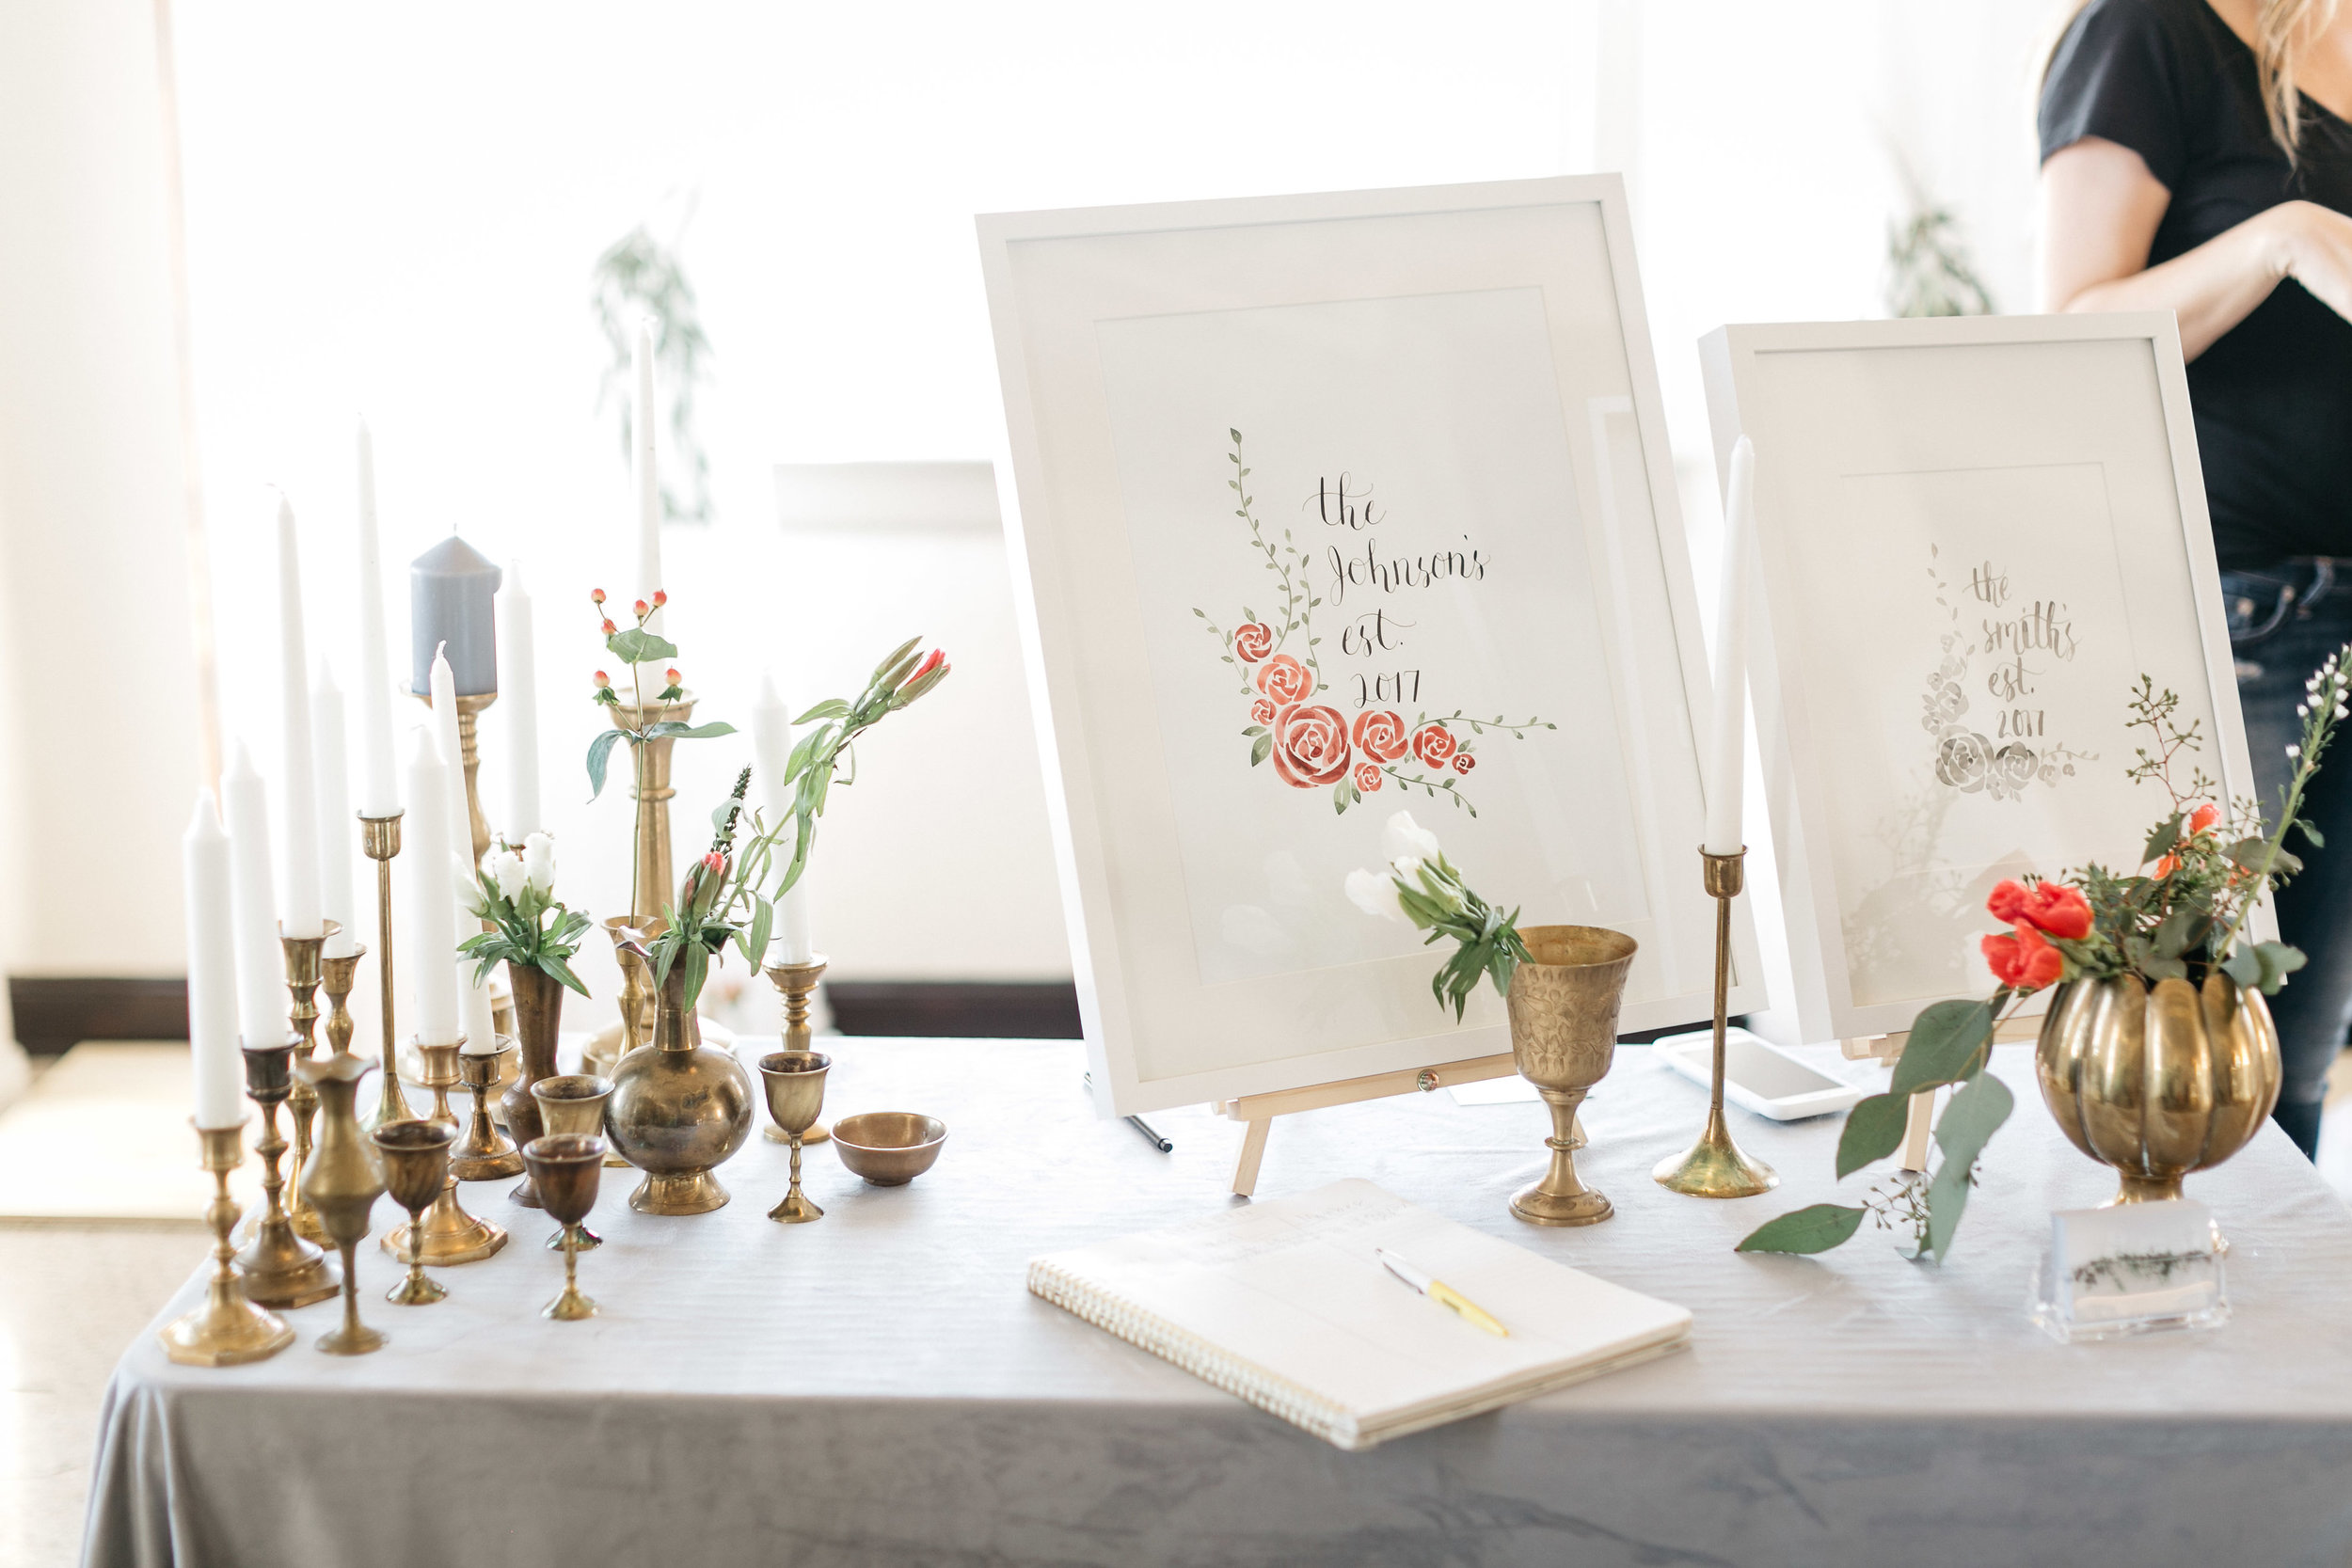  event:  the swoon event   photo:  beckley &amp; co   design:  tiana mae designs  